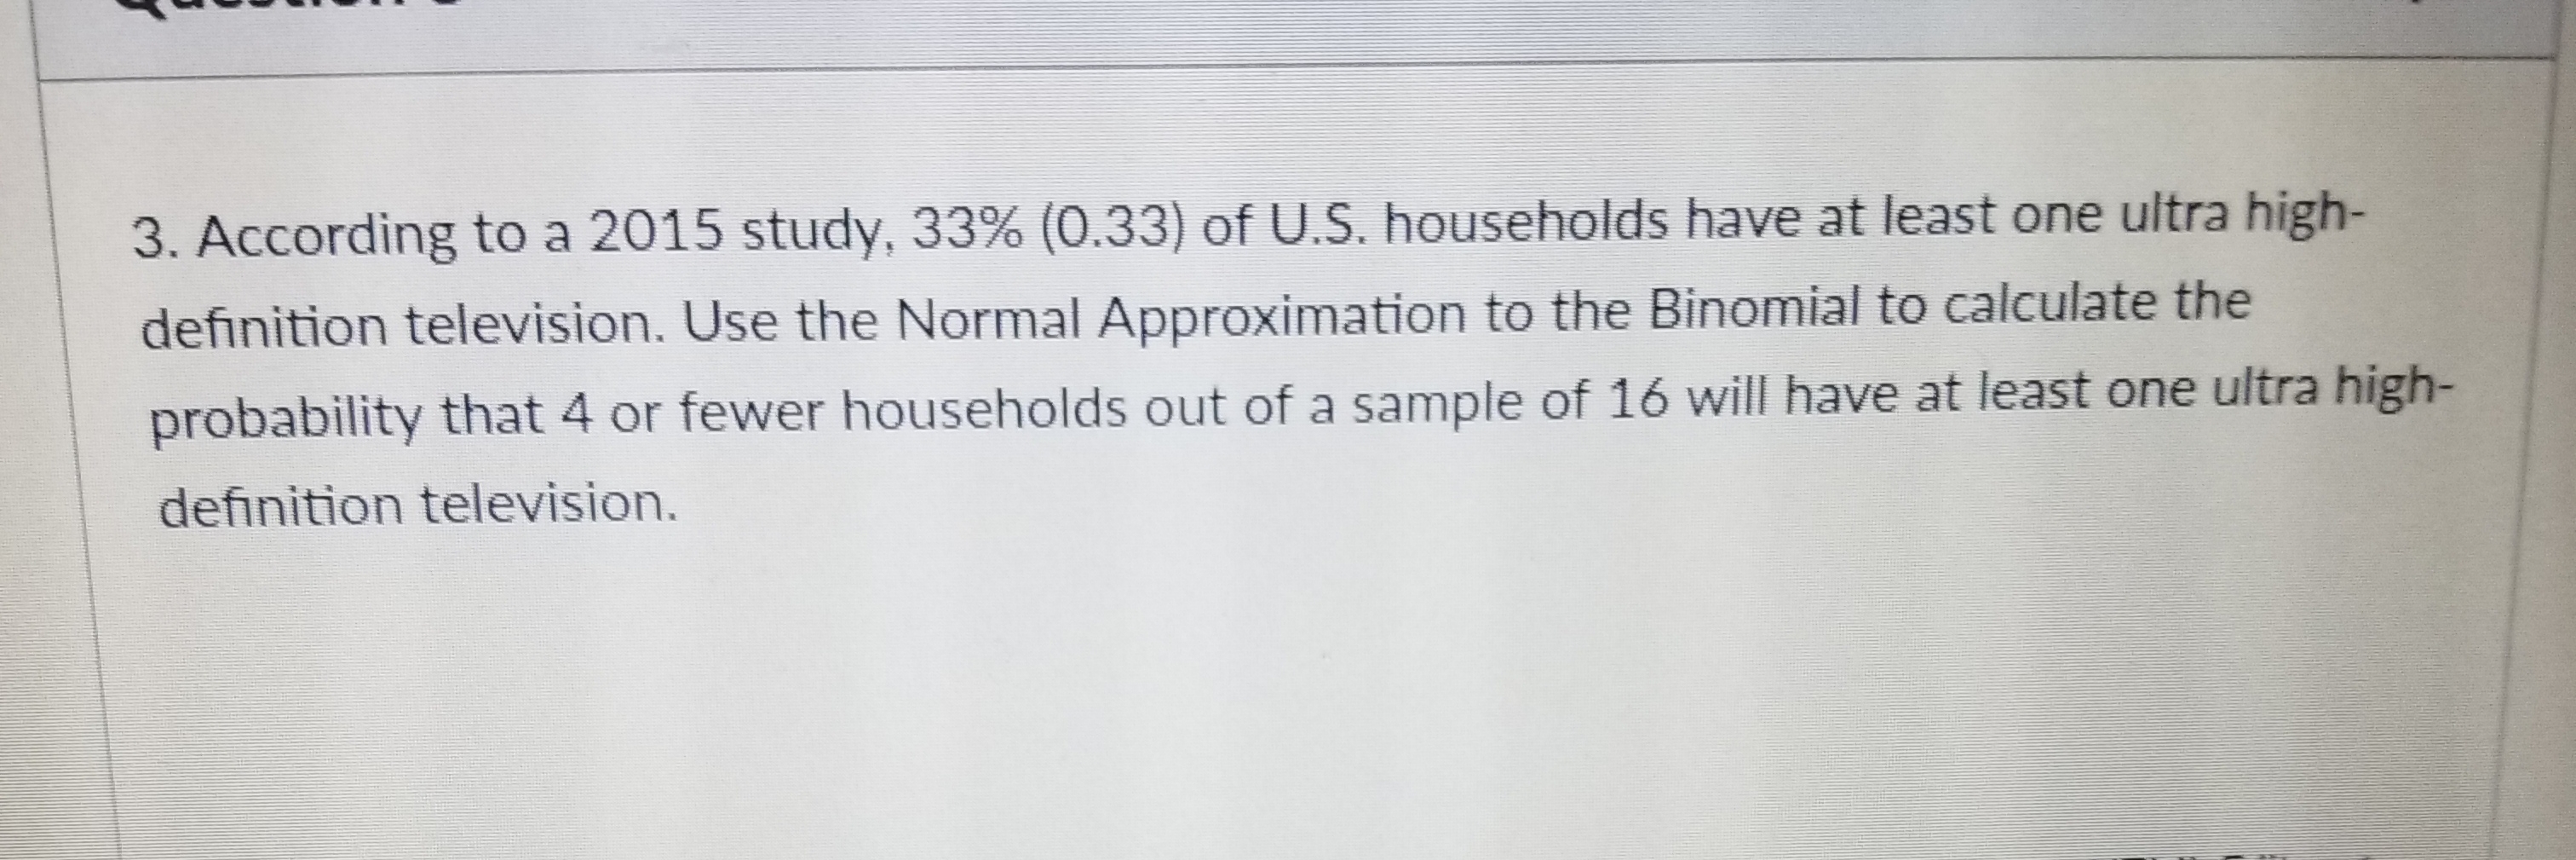 3. According to a 2015 study, 33% (033) of US, households have at least one ultra high-
definition television. Use the Normal Approximation to the Binomial to calculate the
probabilit
definition television.
y that 4 or fewer households out of a sample of 16 will have at least one ultra high-
